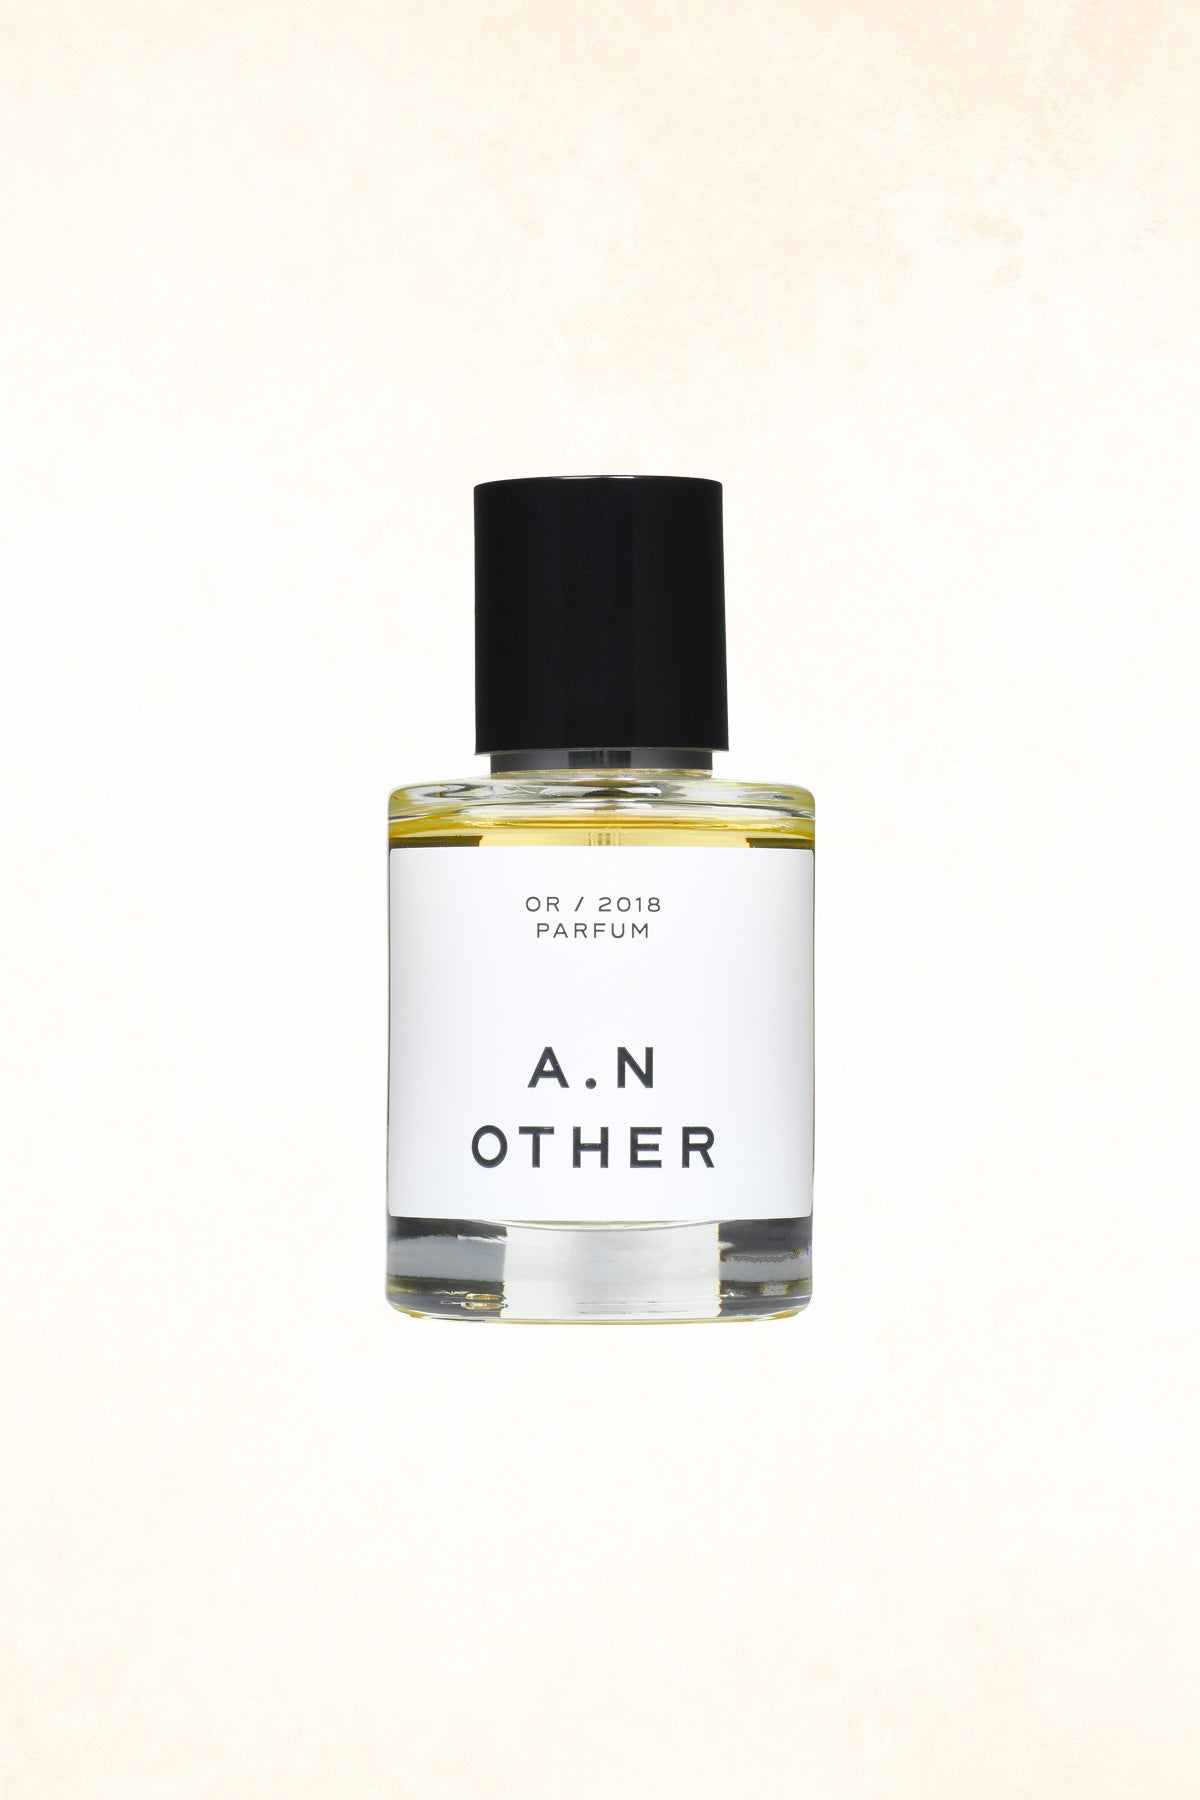 A.N OTHER – OR/2018 Parfum - 50 ml